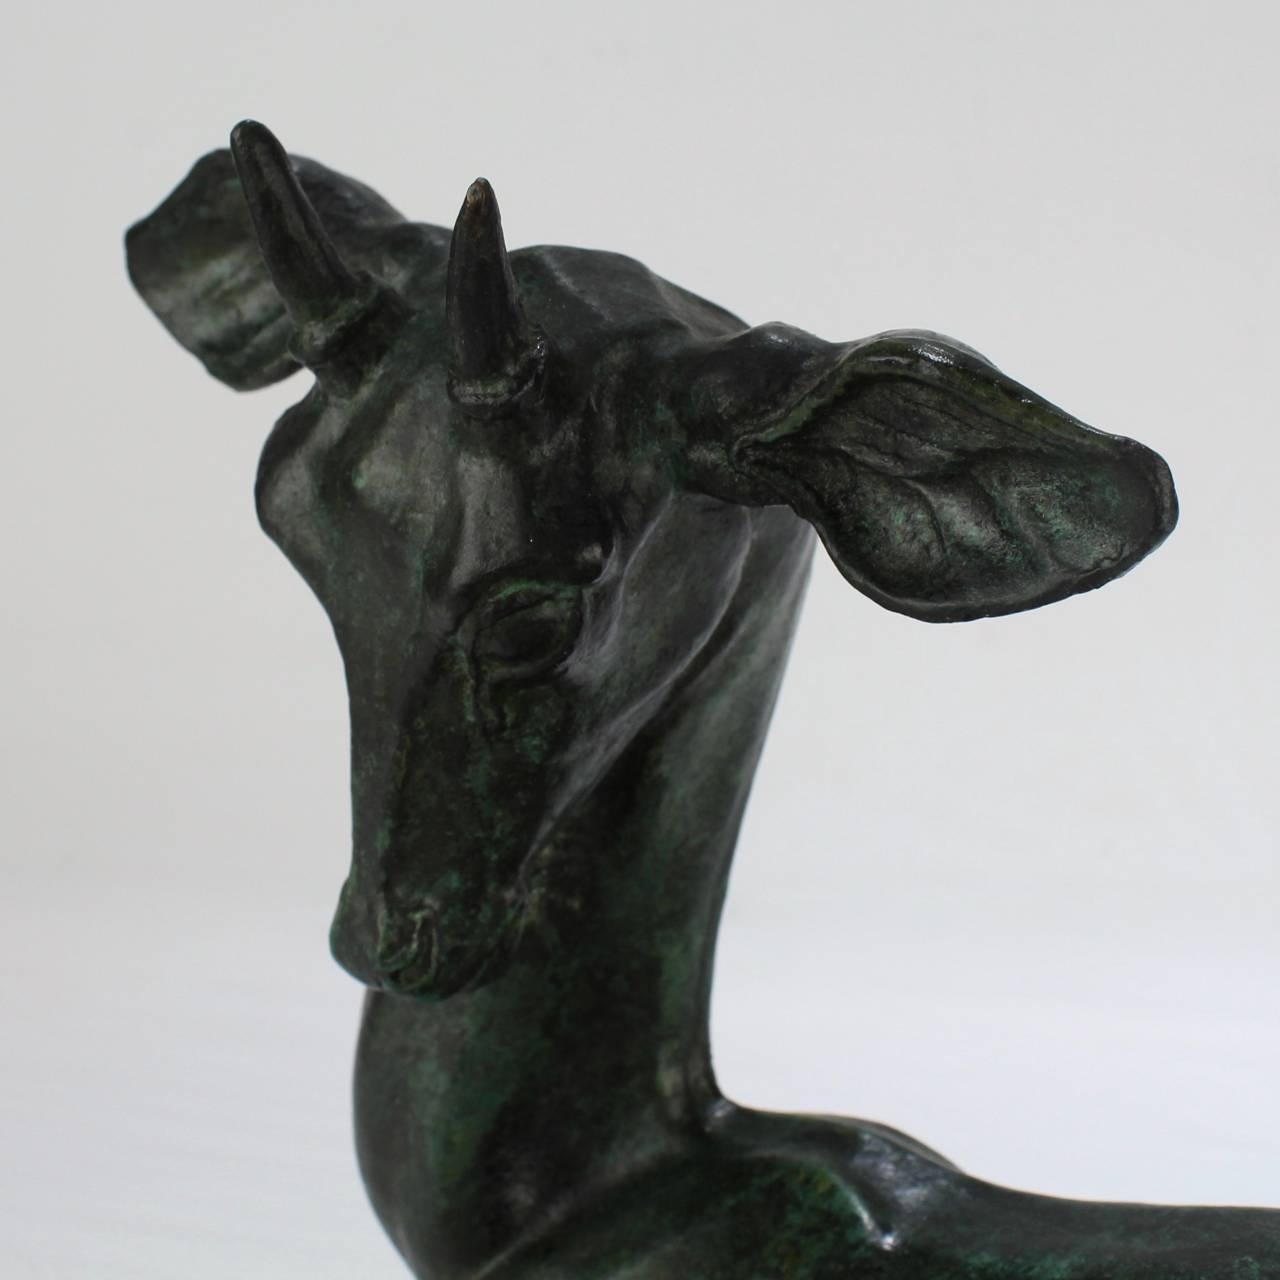 20th Century American Modernist Roman Bronze Works Sculpture of a Gazelle by Walter Rotan For Sale